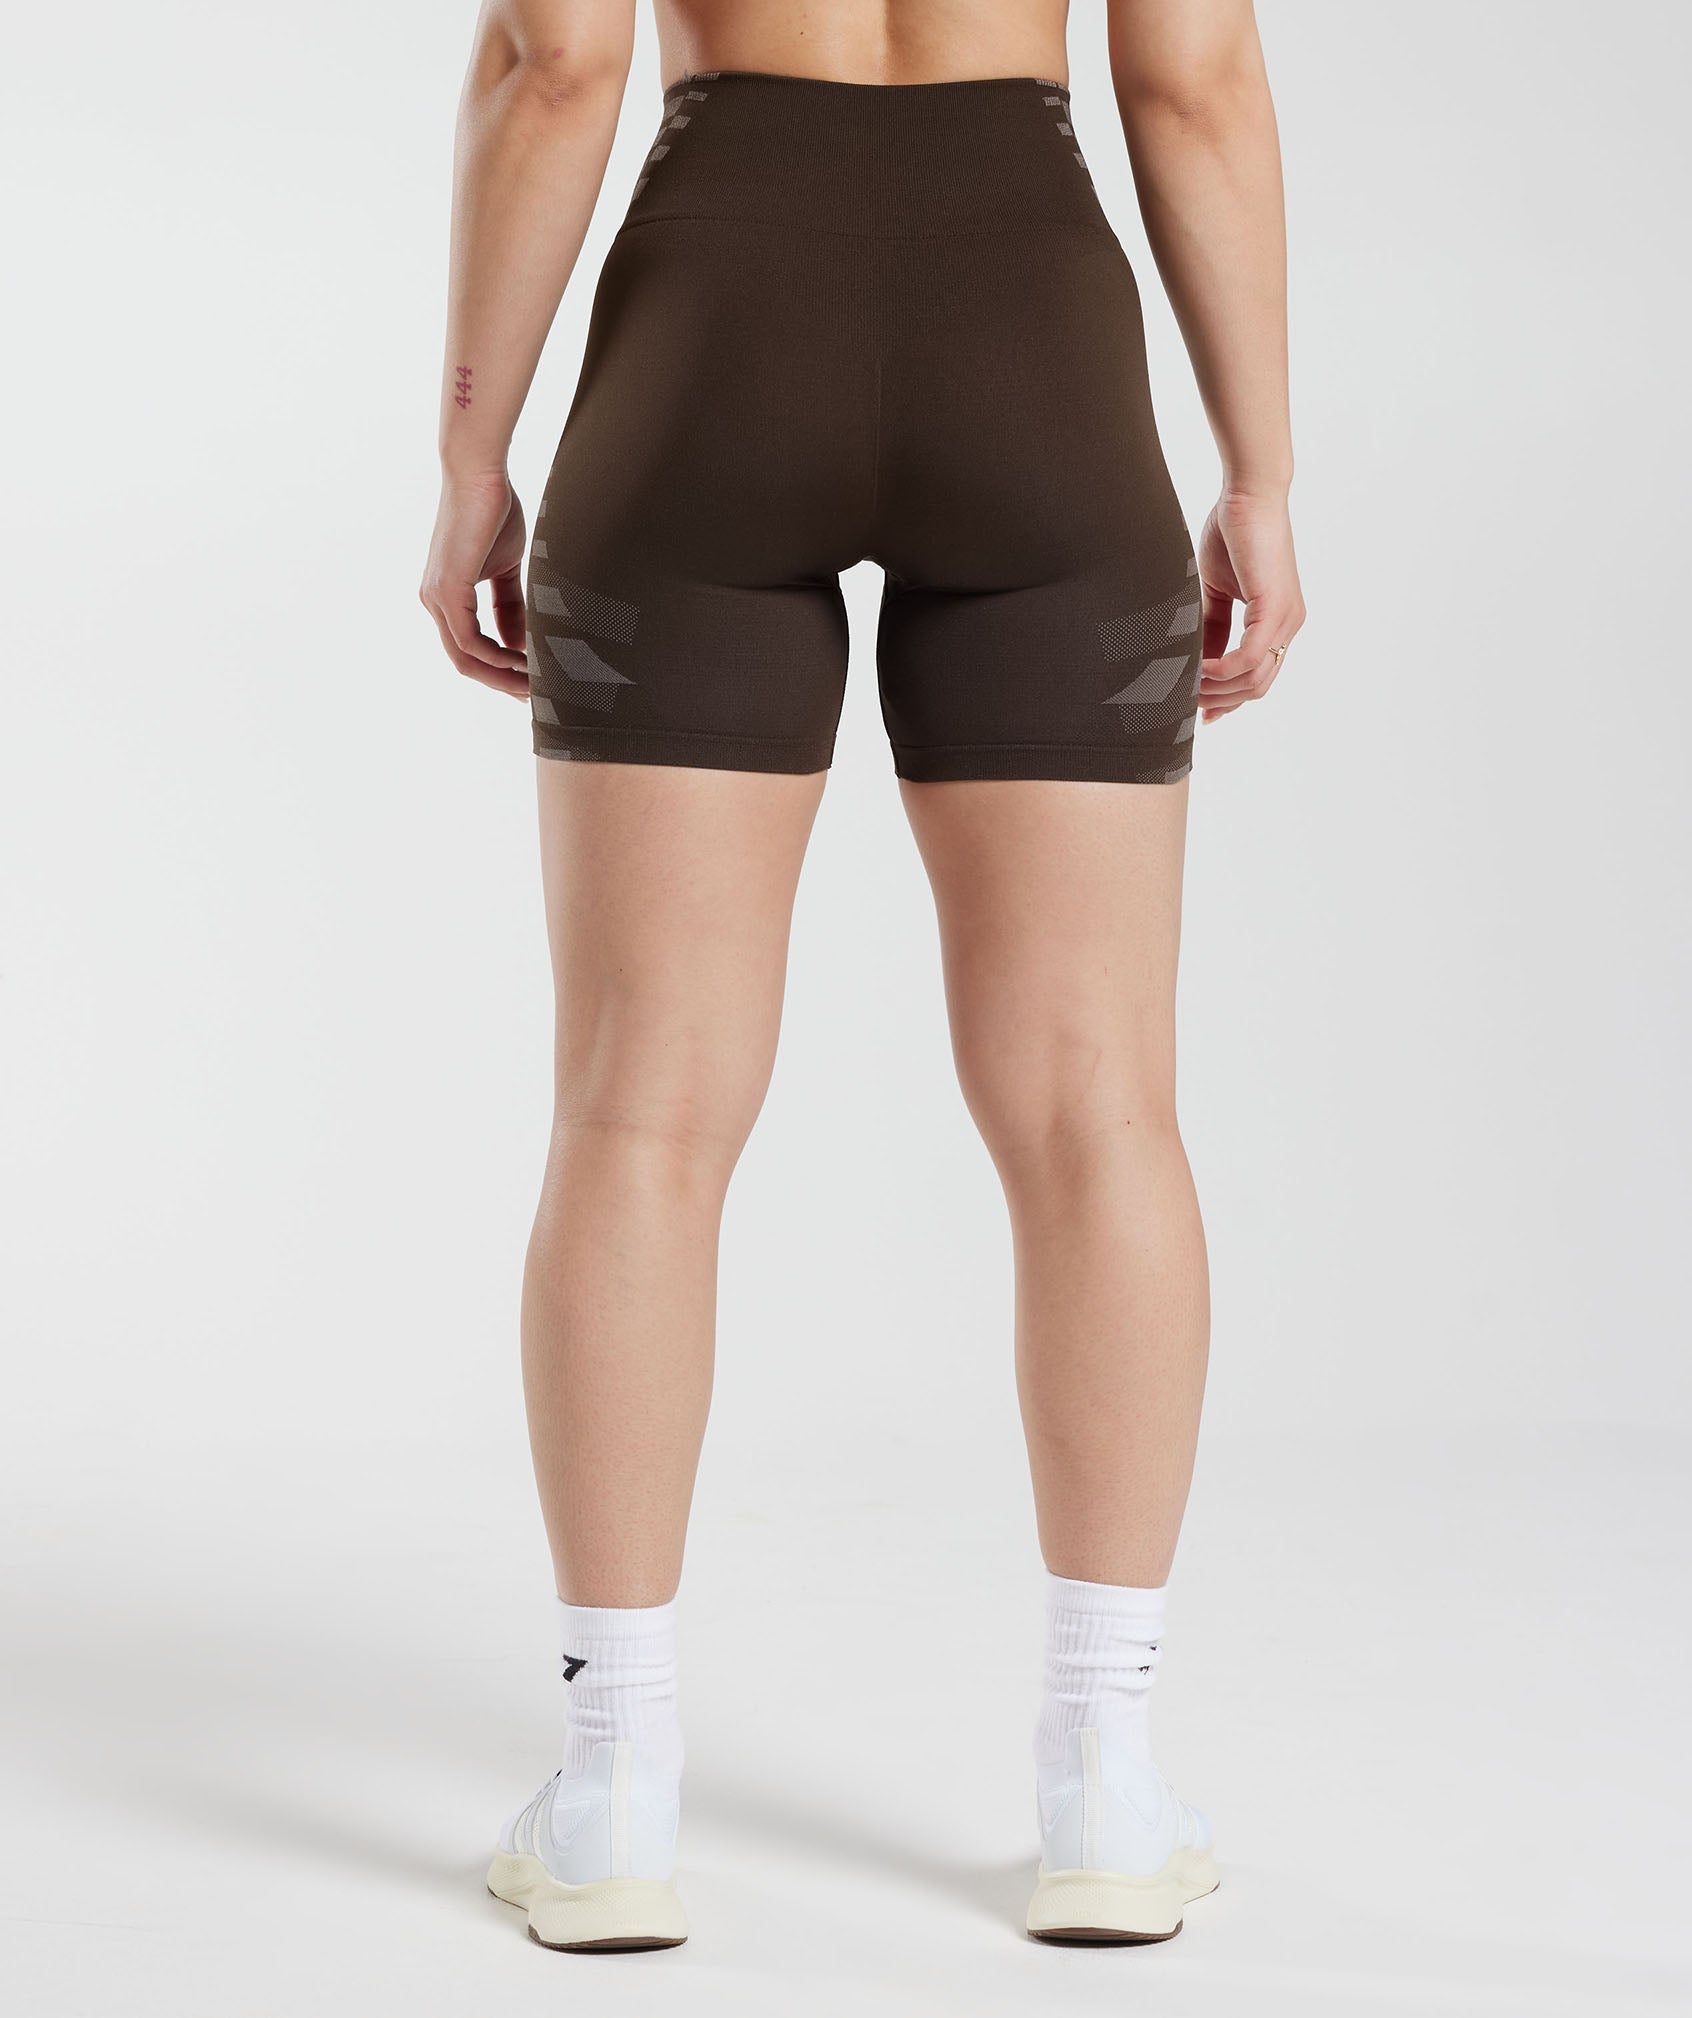 Apex Limit Shorts in Archive Brown/Truffle Brown - view 2